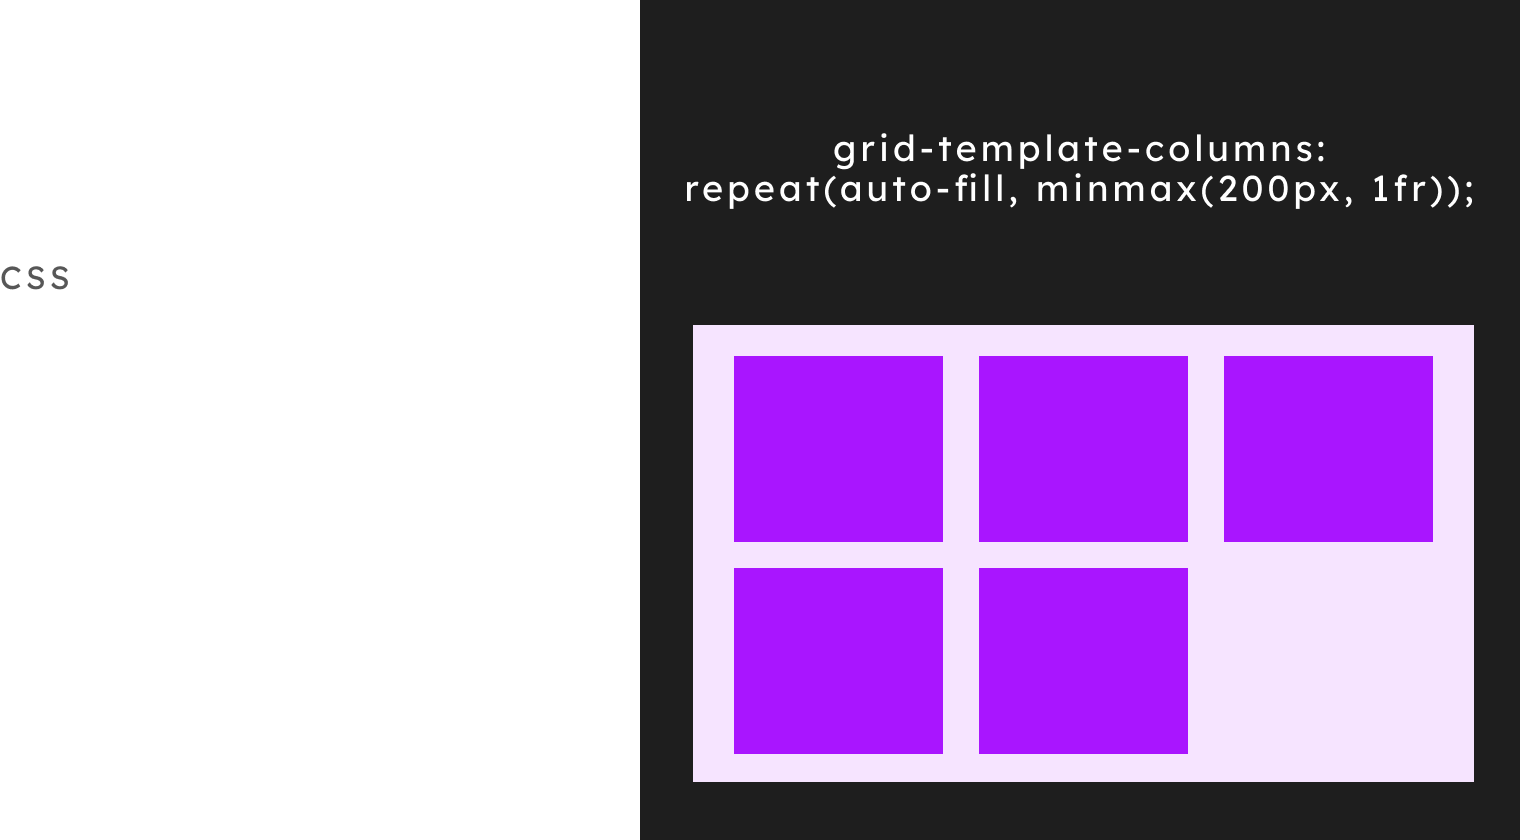 Responsive Card Grid Layout